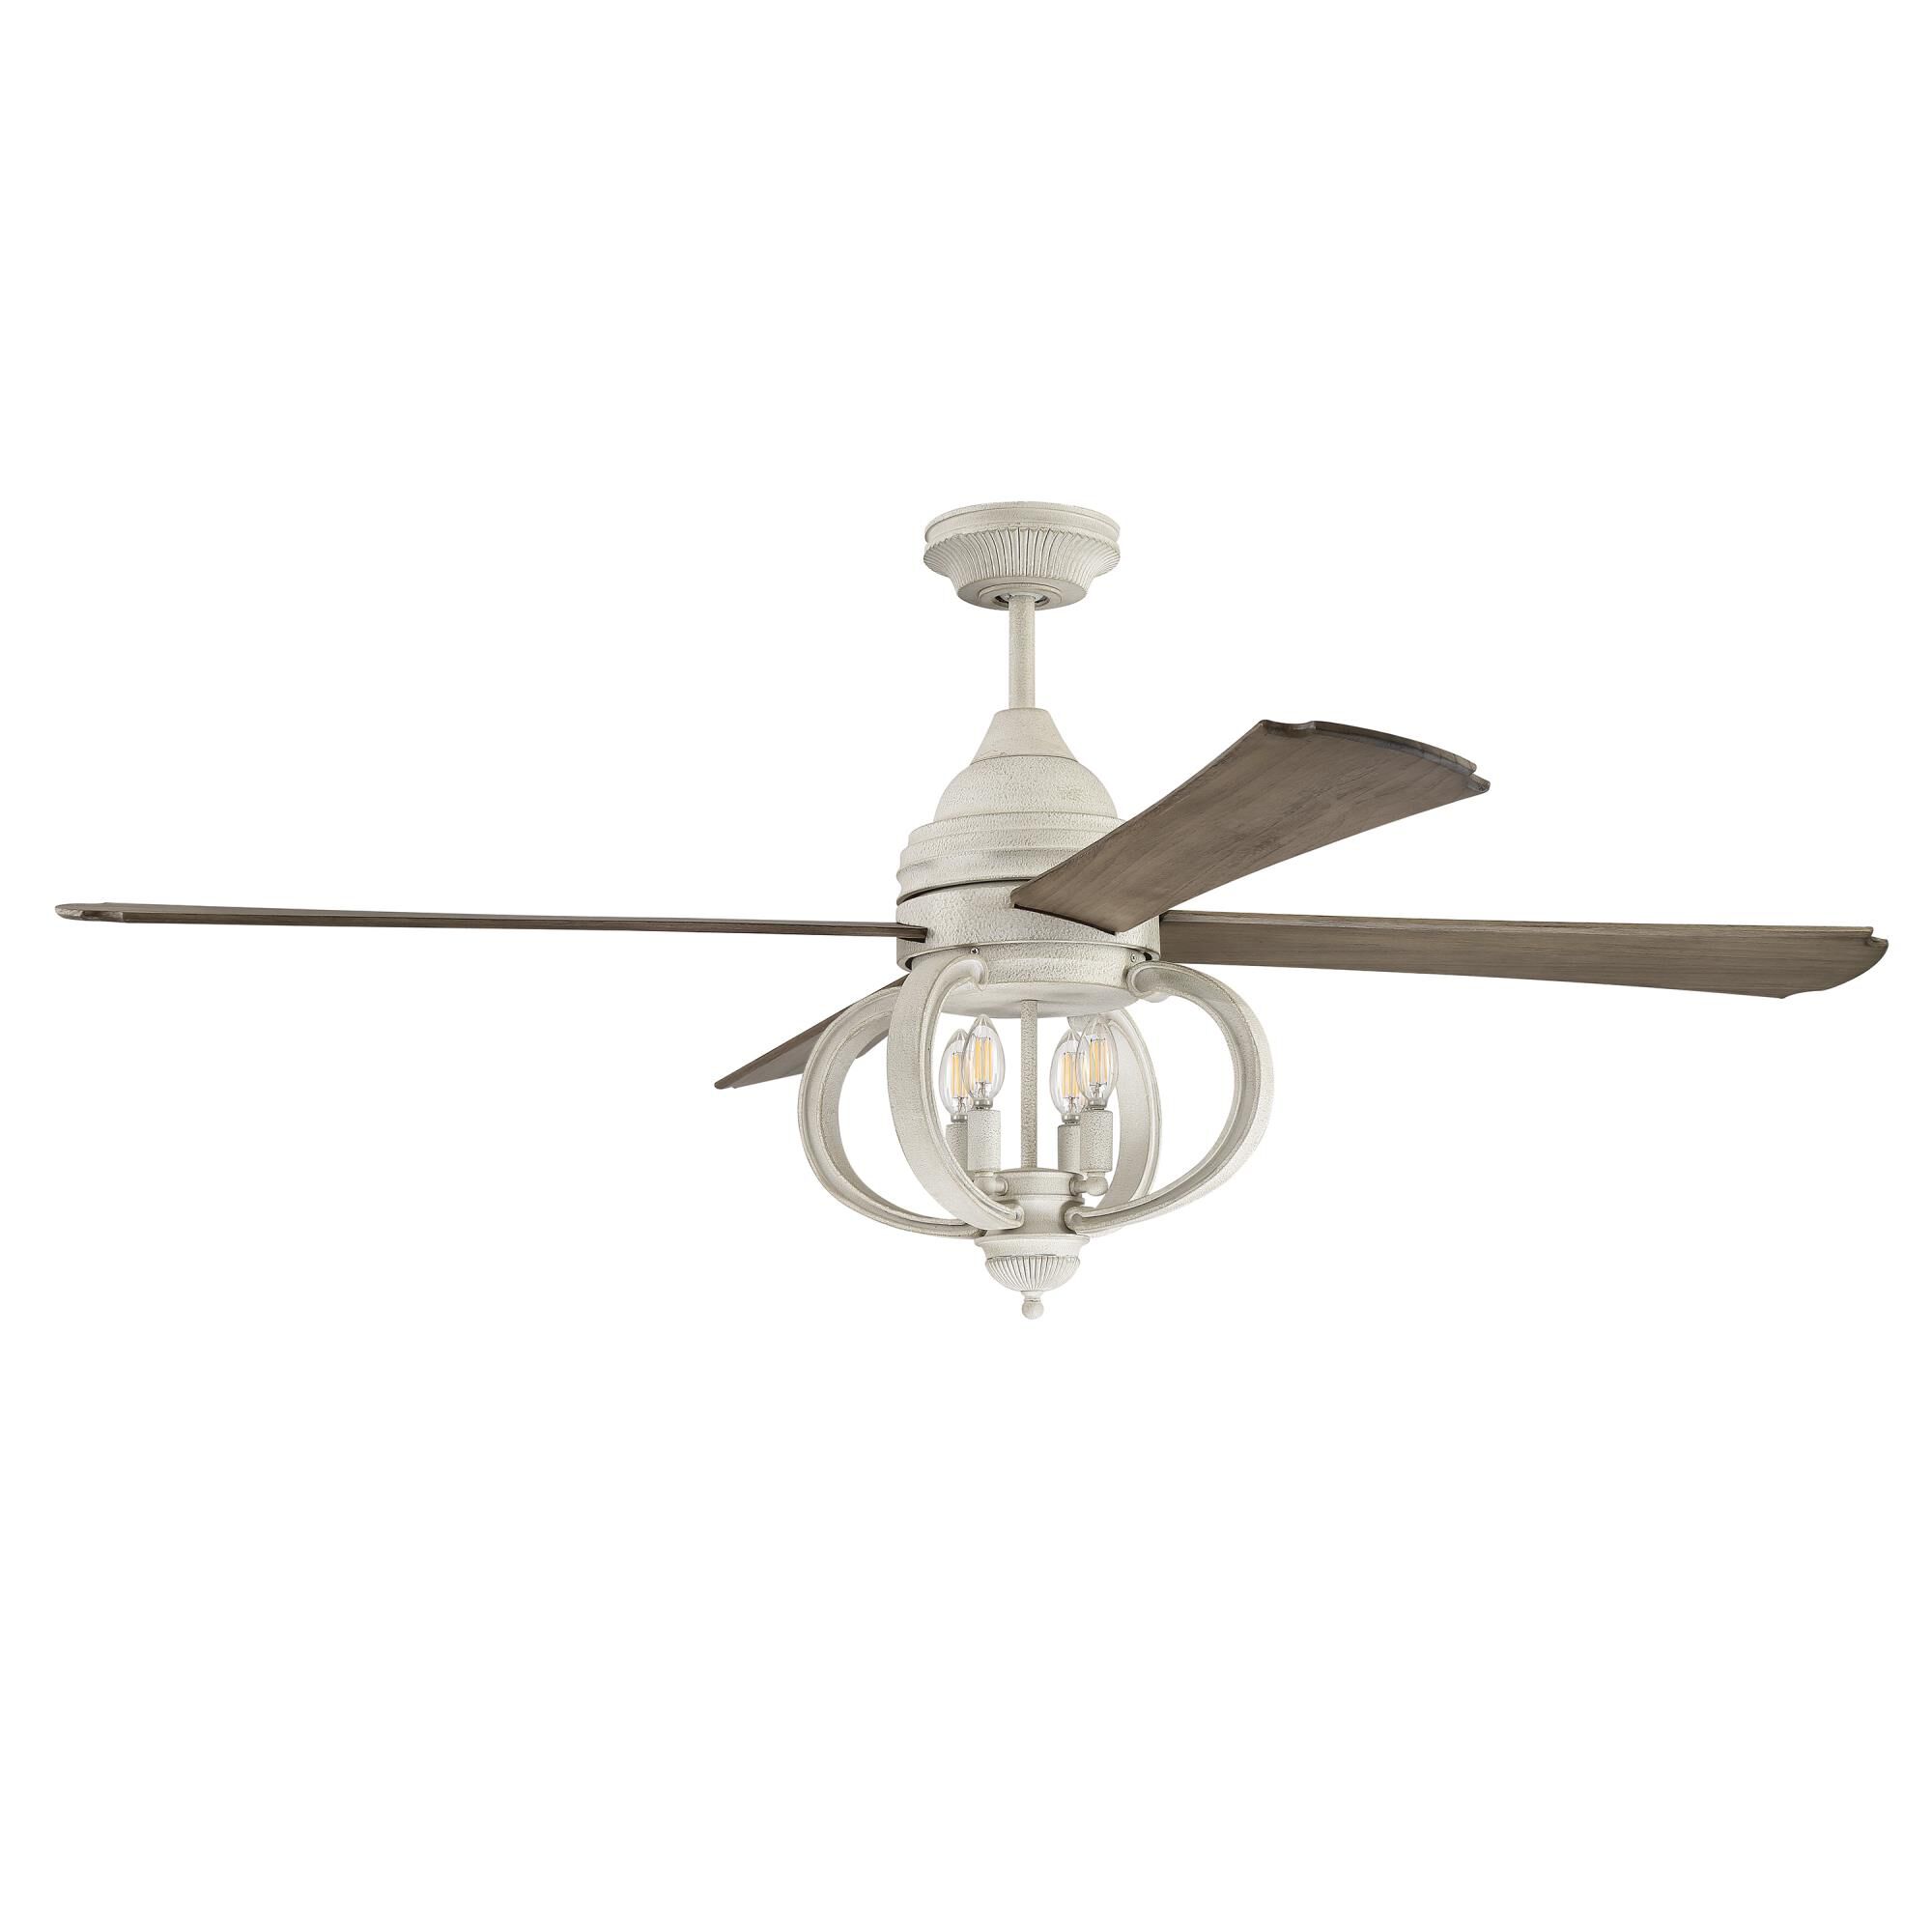 Photos - Fan Craftmade Augusta 60 Inch Ceiling  with Light Kit Augusta - AUG60CW4 